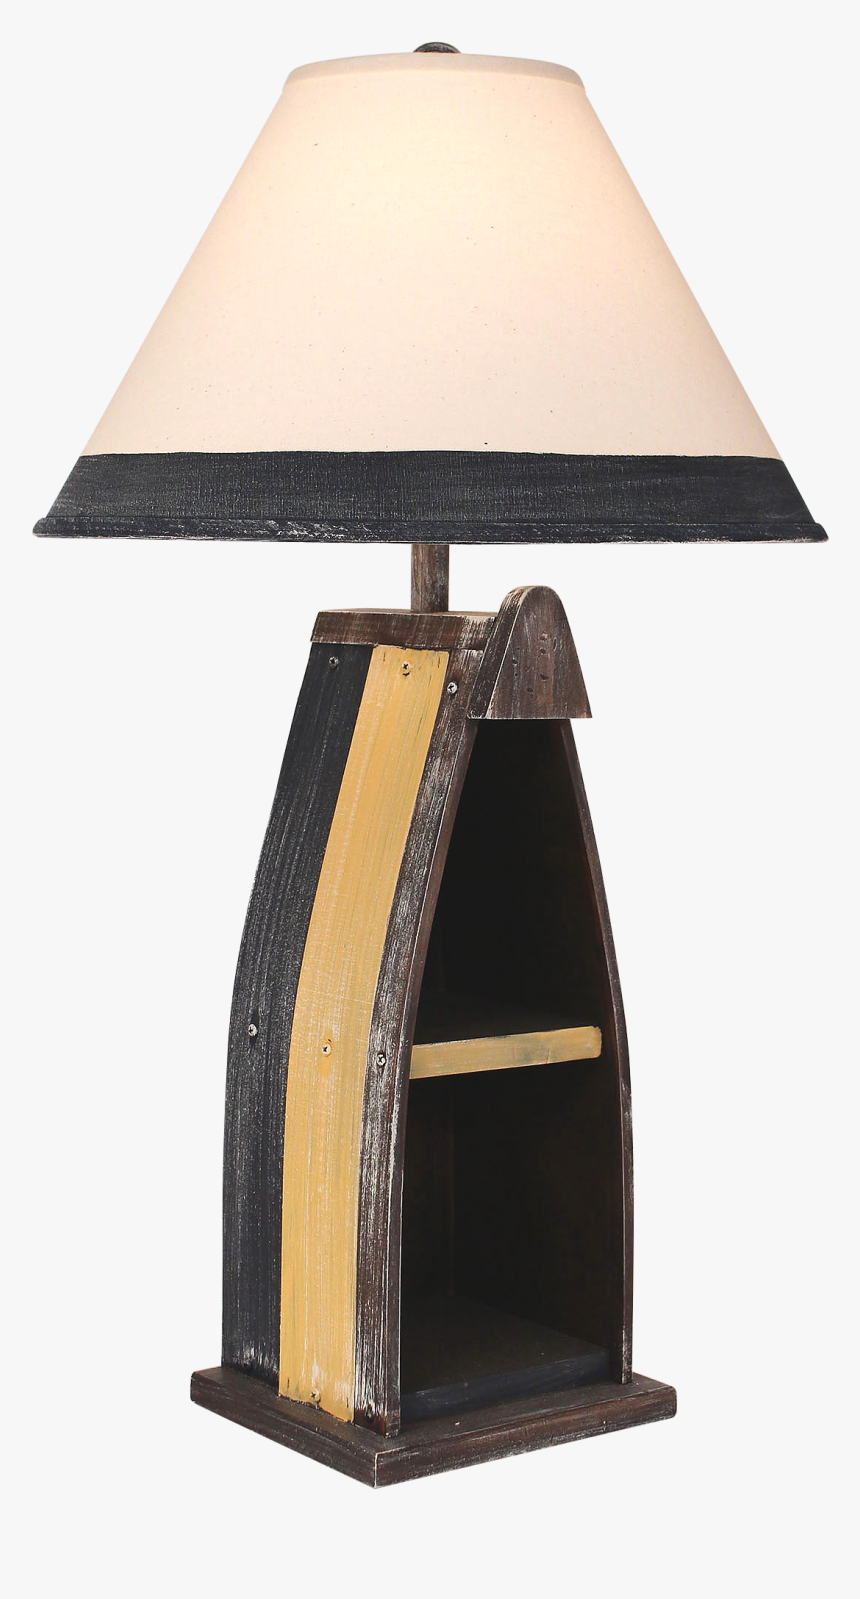 Sail Wooden Boat Table Lamp - Lampshade, HD Png Download, Free Download